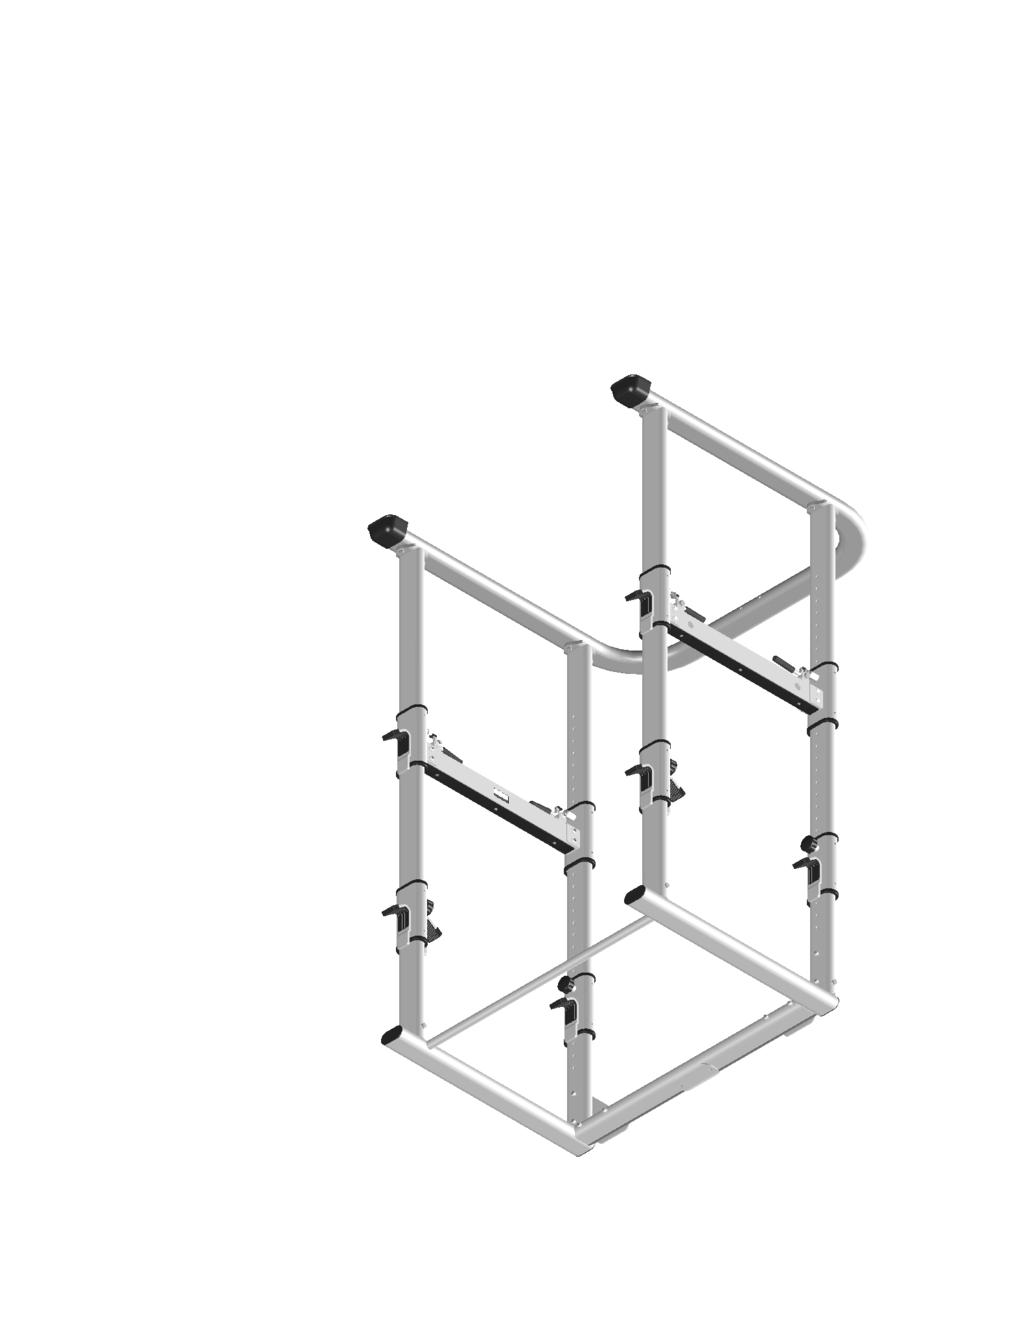 ASSEMBLY INSTRUCTIONS 3 3/4" RPR-5 50 3/4" 51 1/4" Power Rack (Cage)